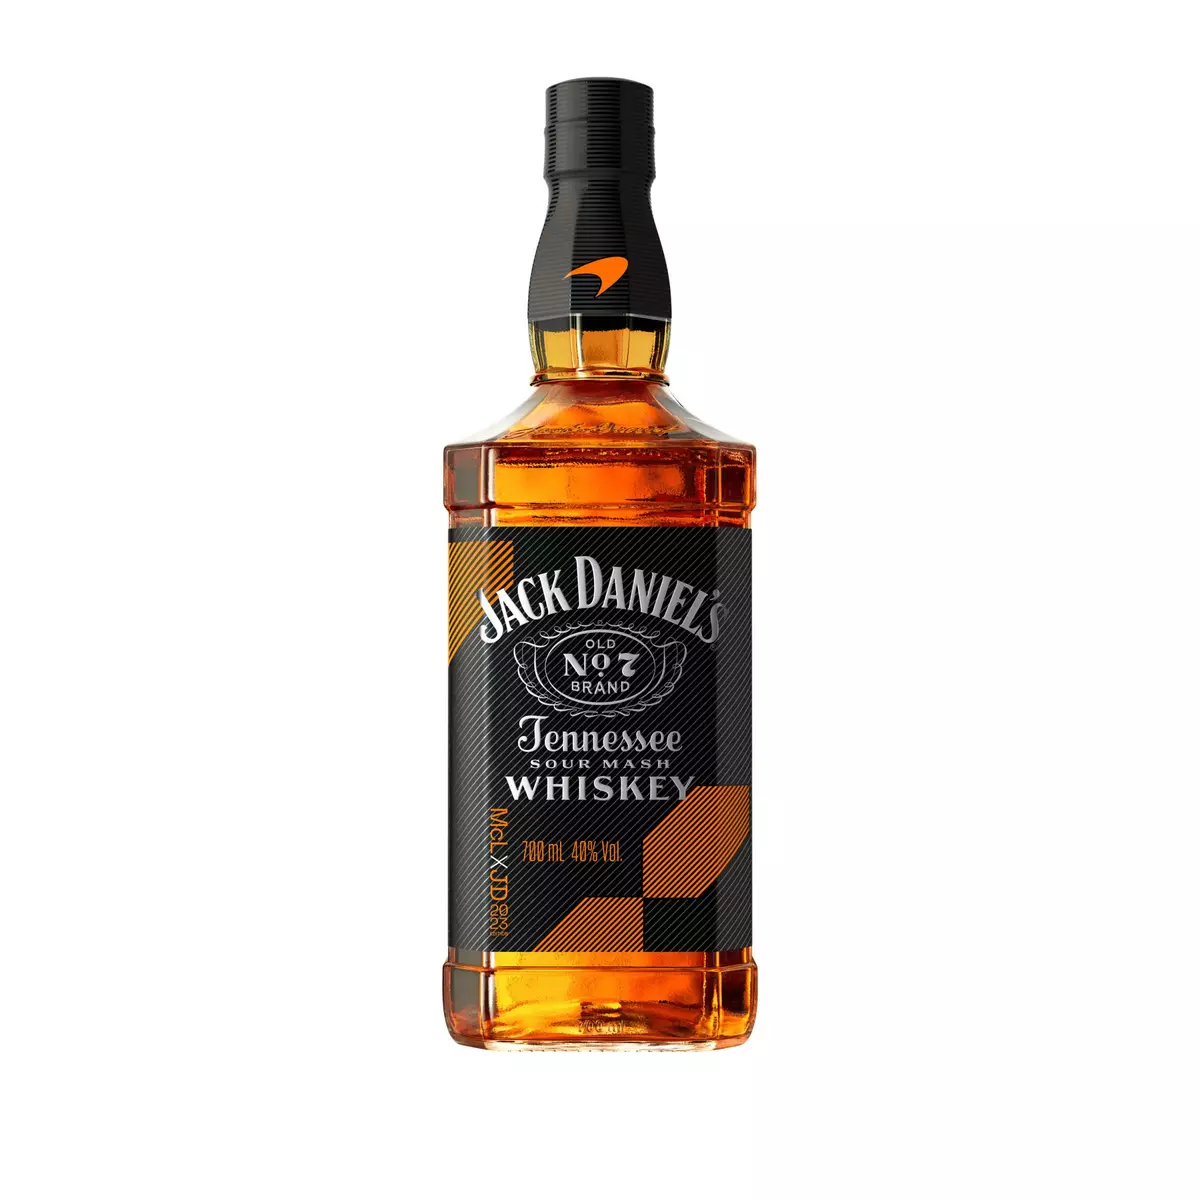 JACK DANIEL'S Whiskey Tennessee old n°7 McLarent 40% 700ml